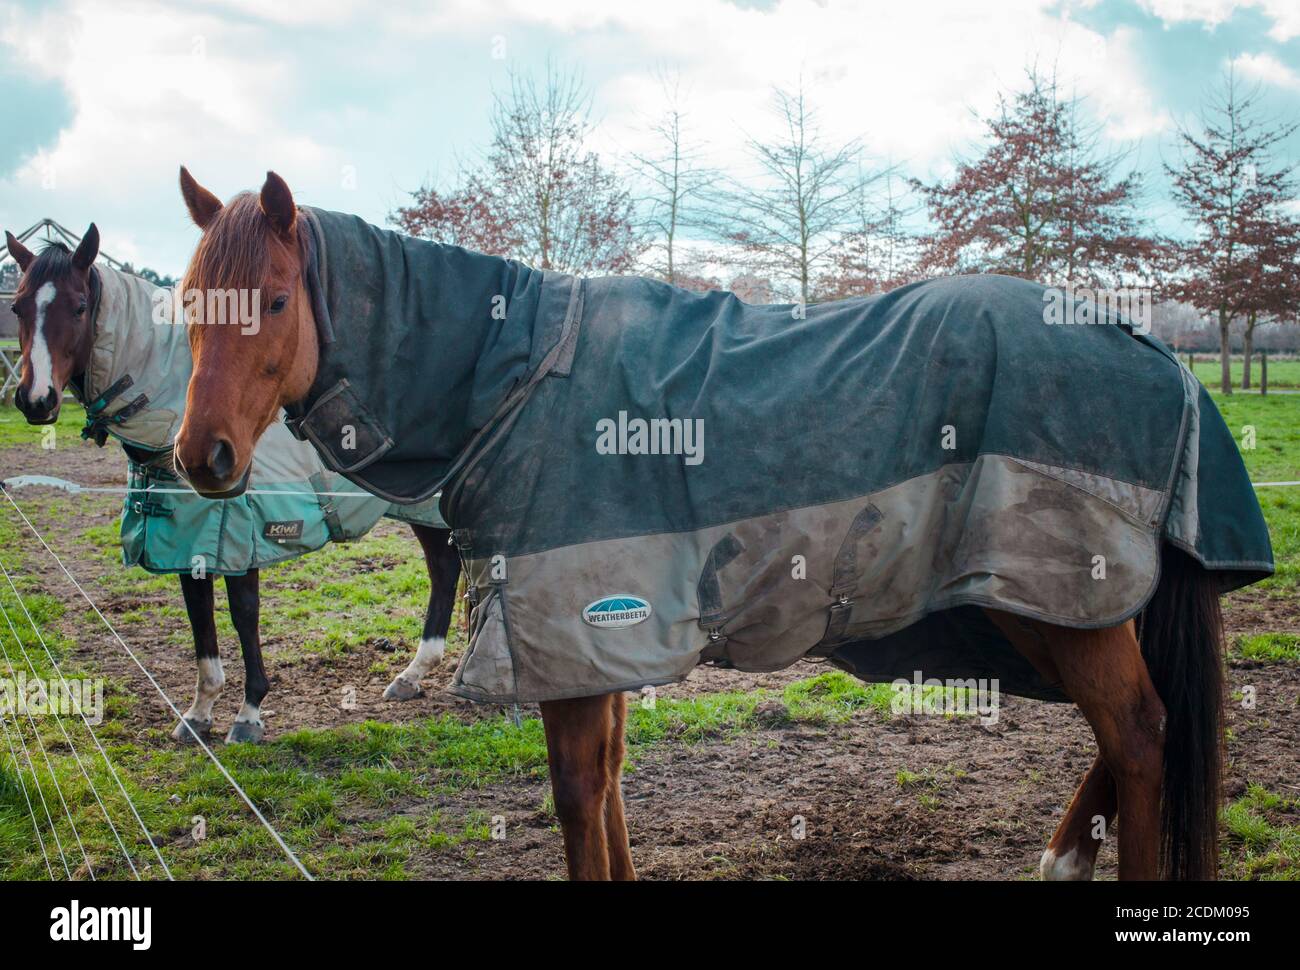 New Zealand Countryside, iconic kiwi scenes: horses with their winter coats on (to protect them from frosty nights). Stock Photo